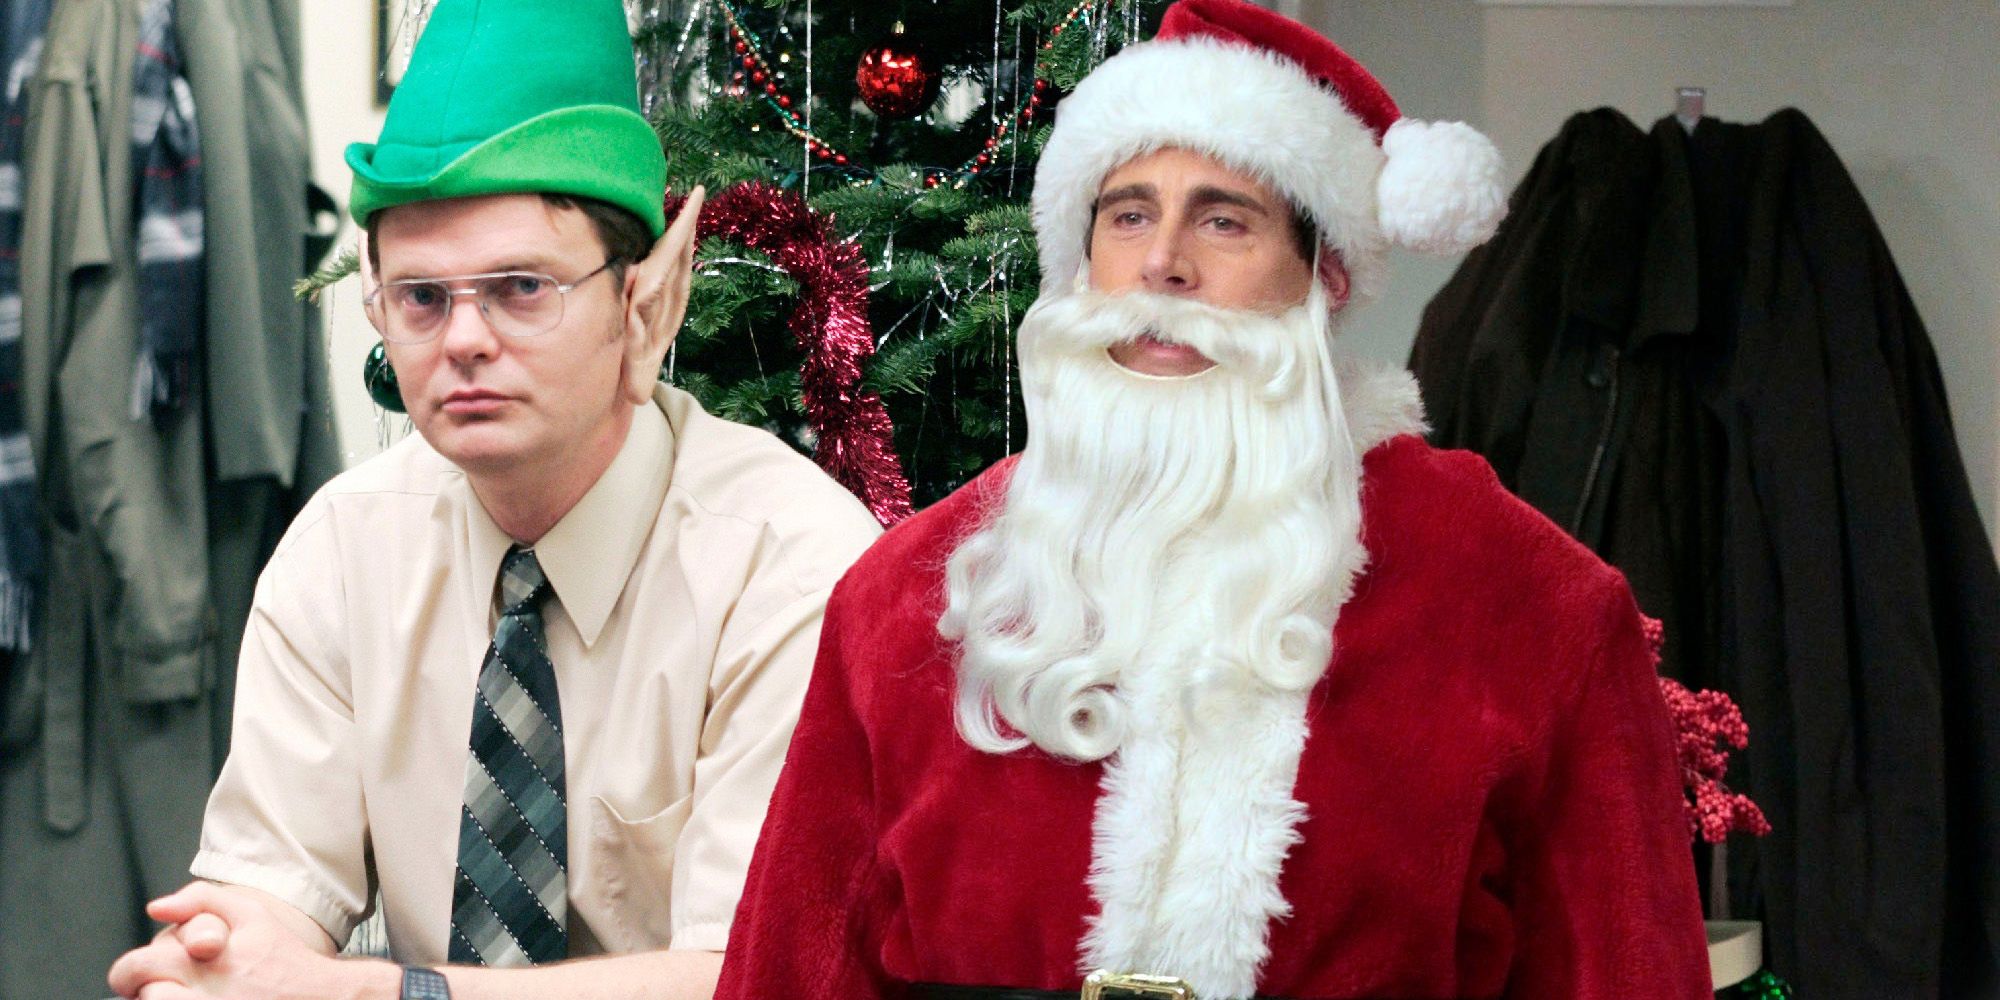 The office Christmas episodes